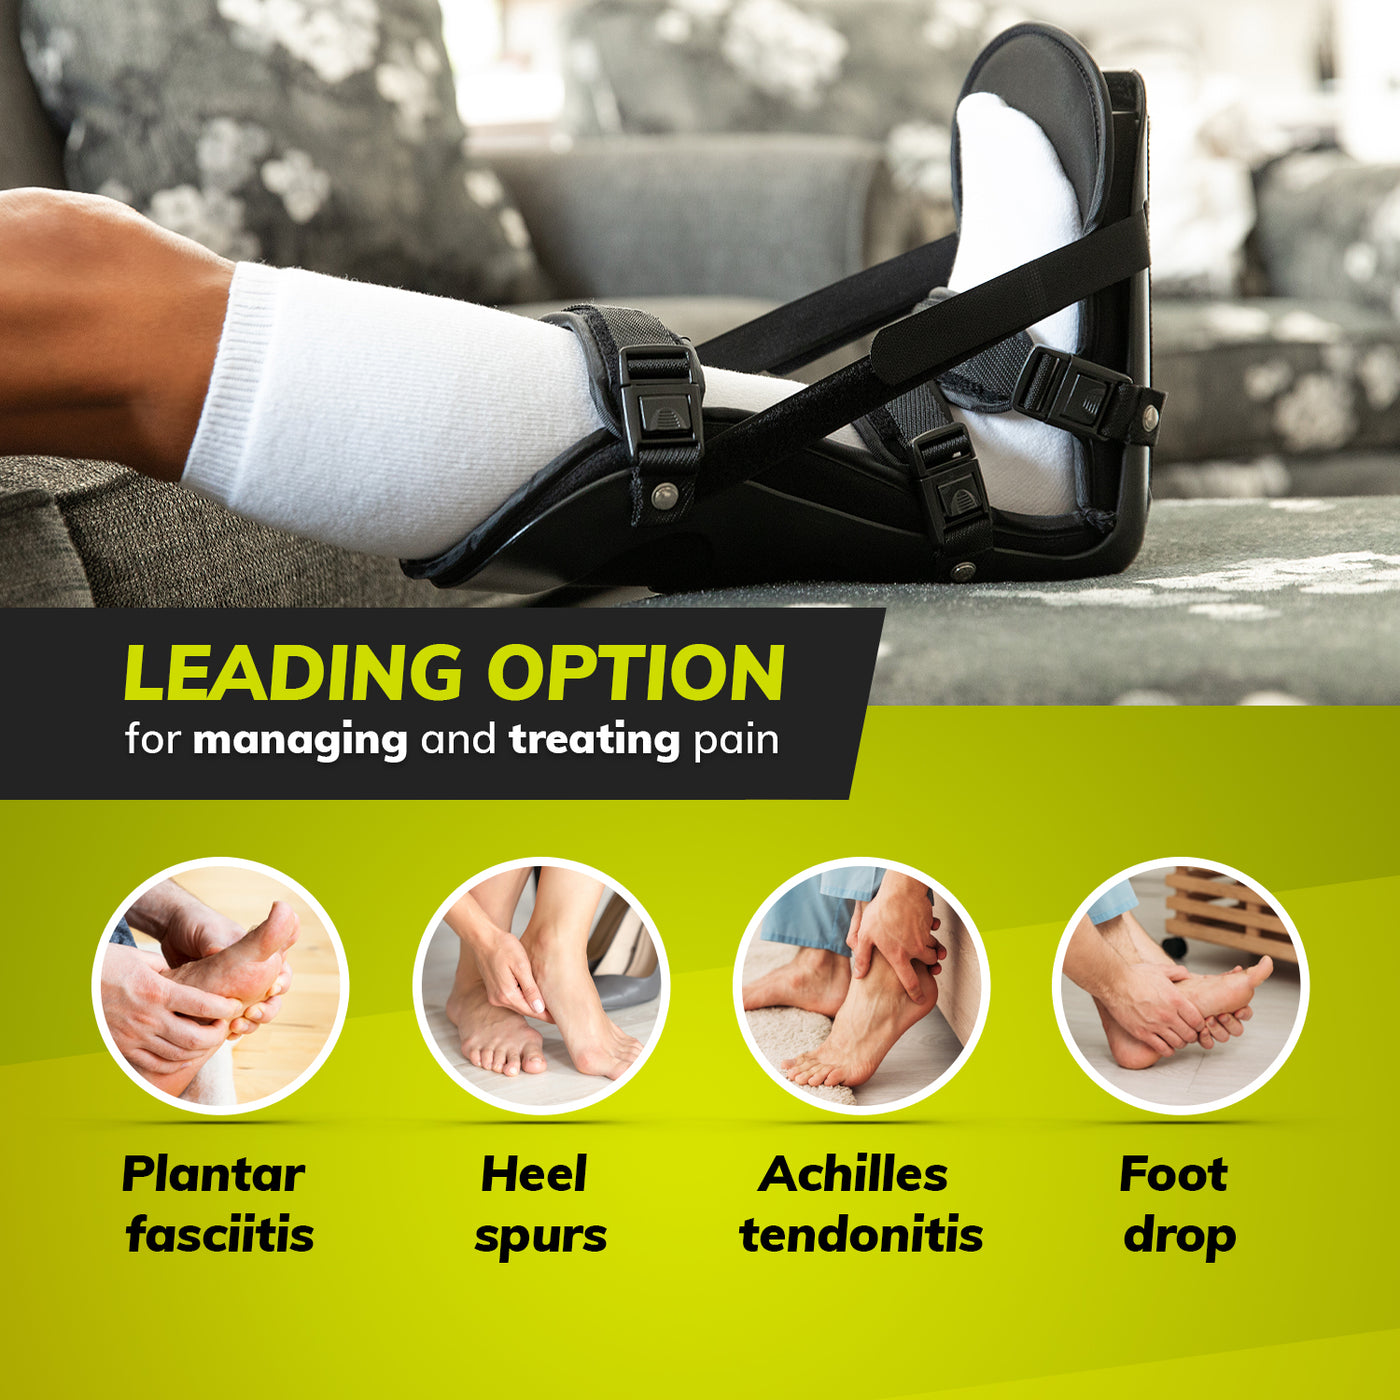 Wearing a stretch boot at night can help relieve plantar fasciitis, heel spurs, and achilles tendonitis